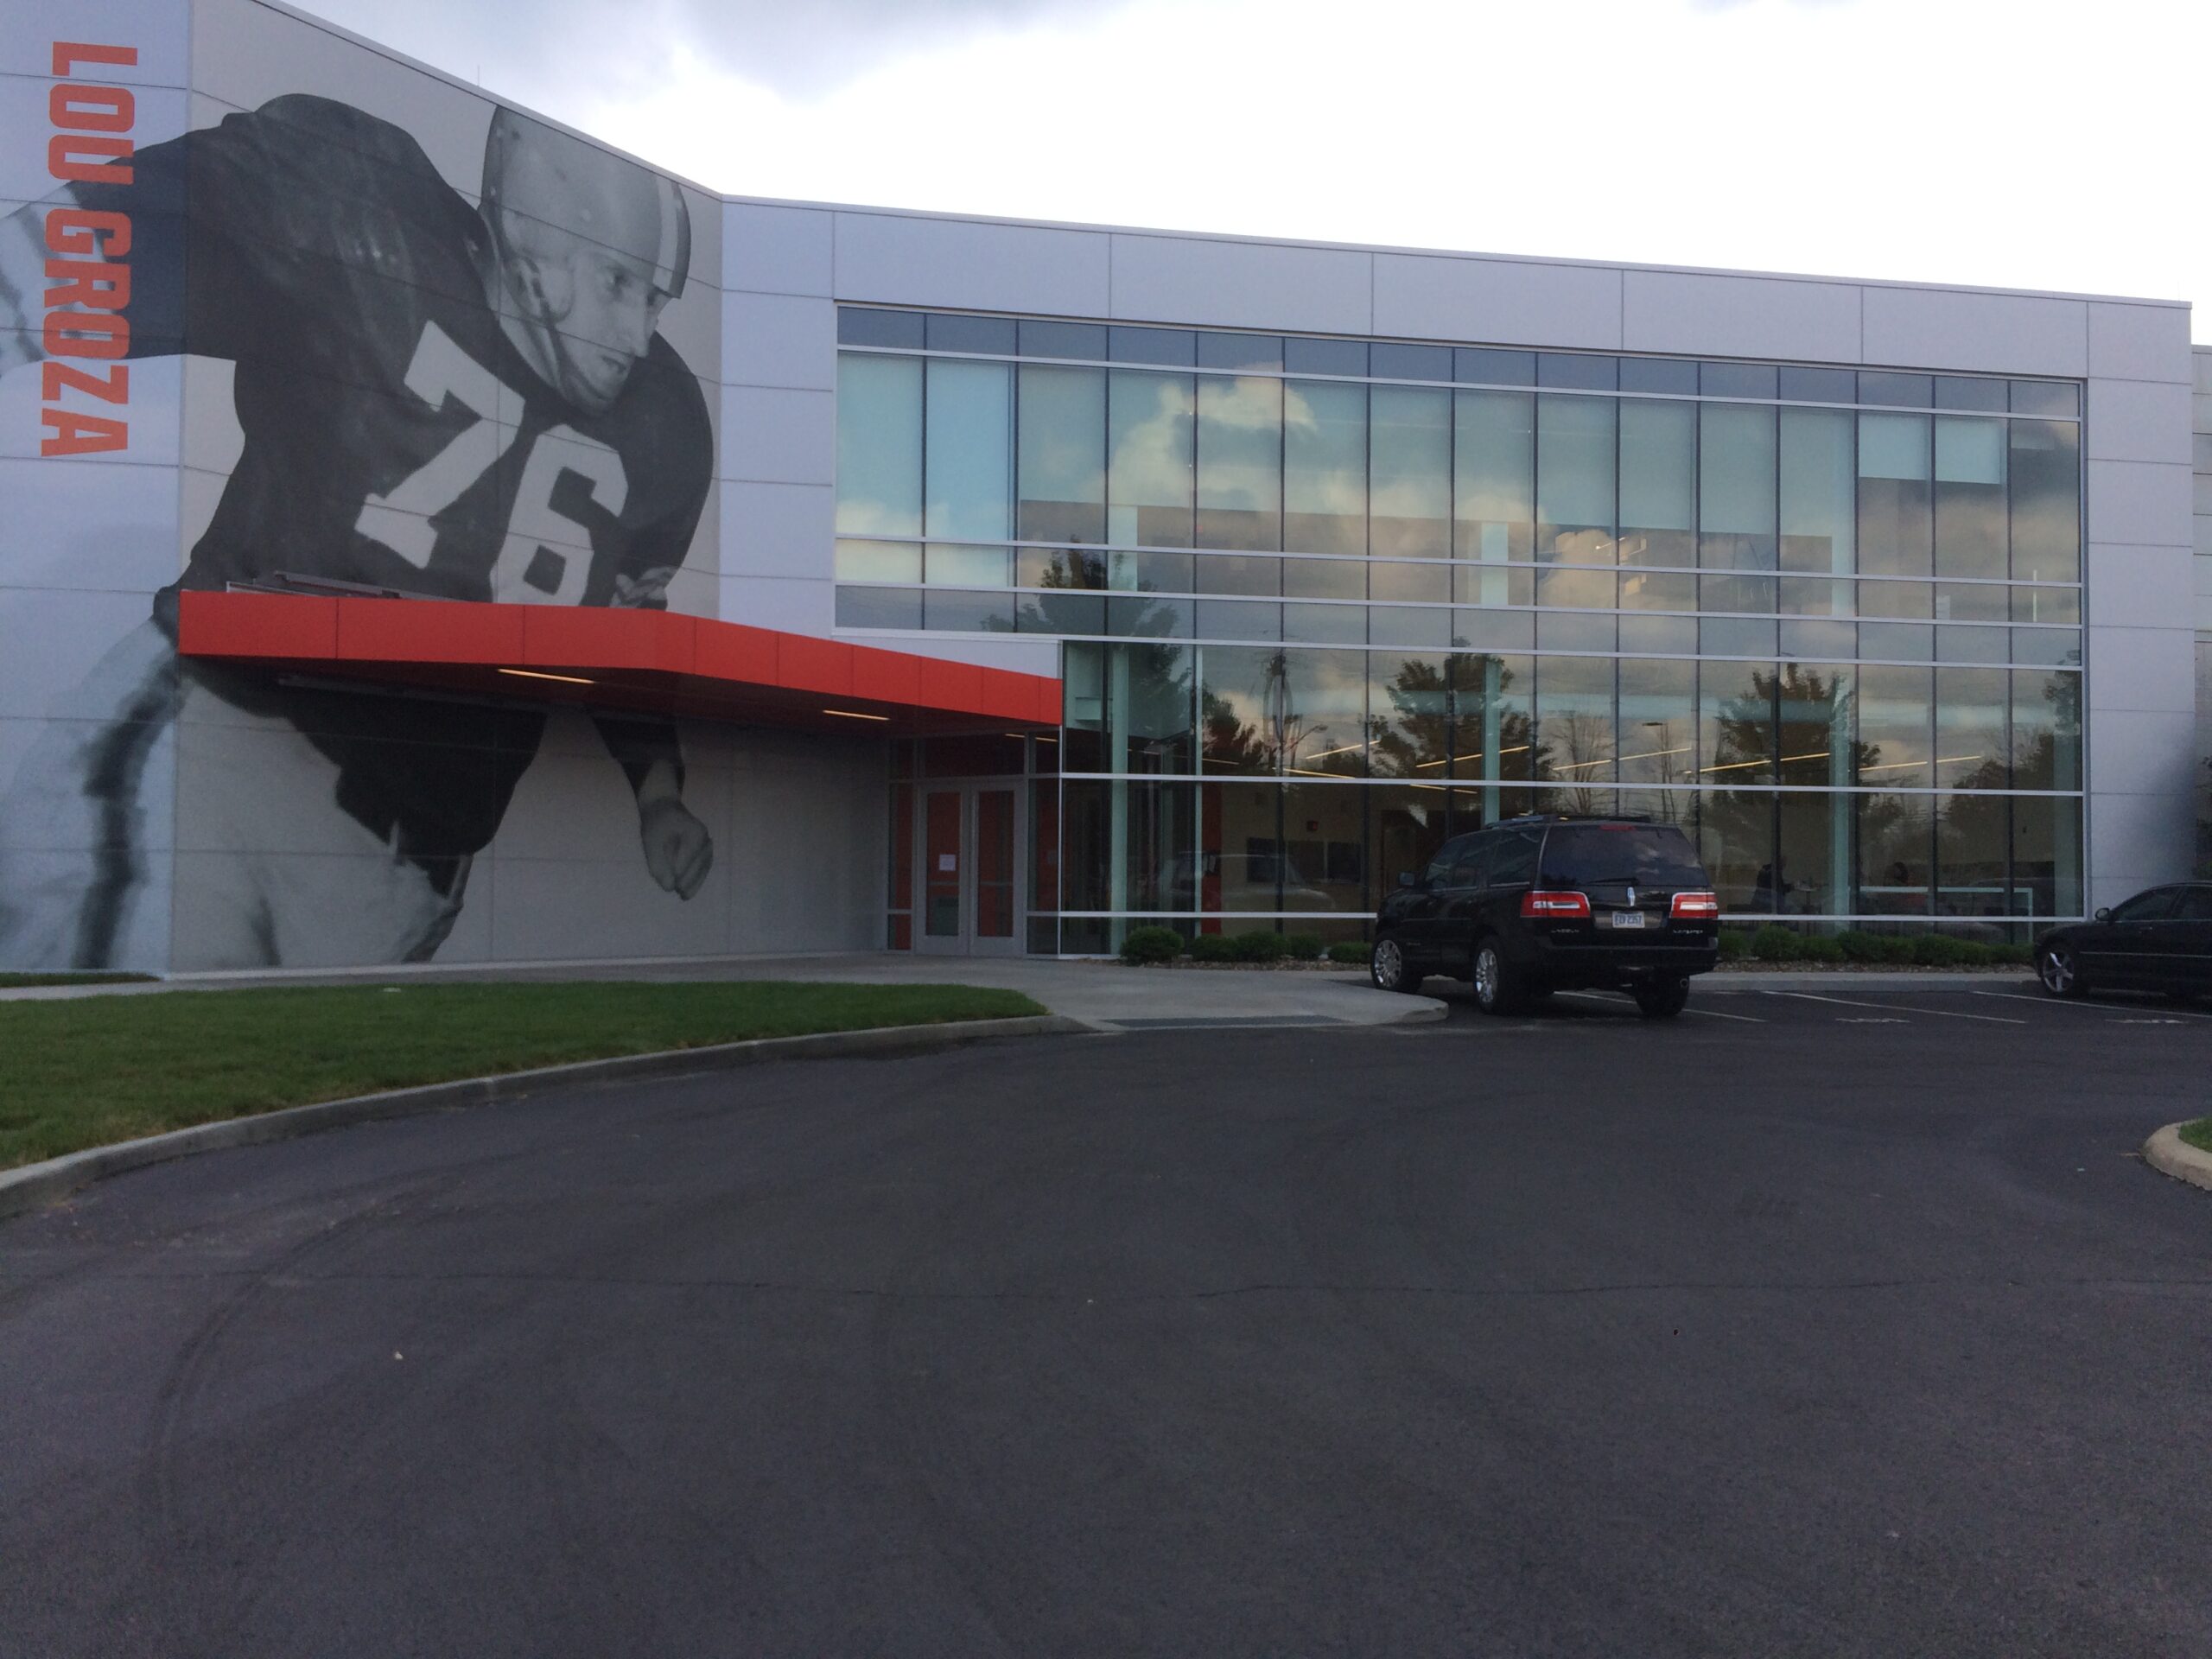 Cleveland Browns Training Facility 5 scaled